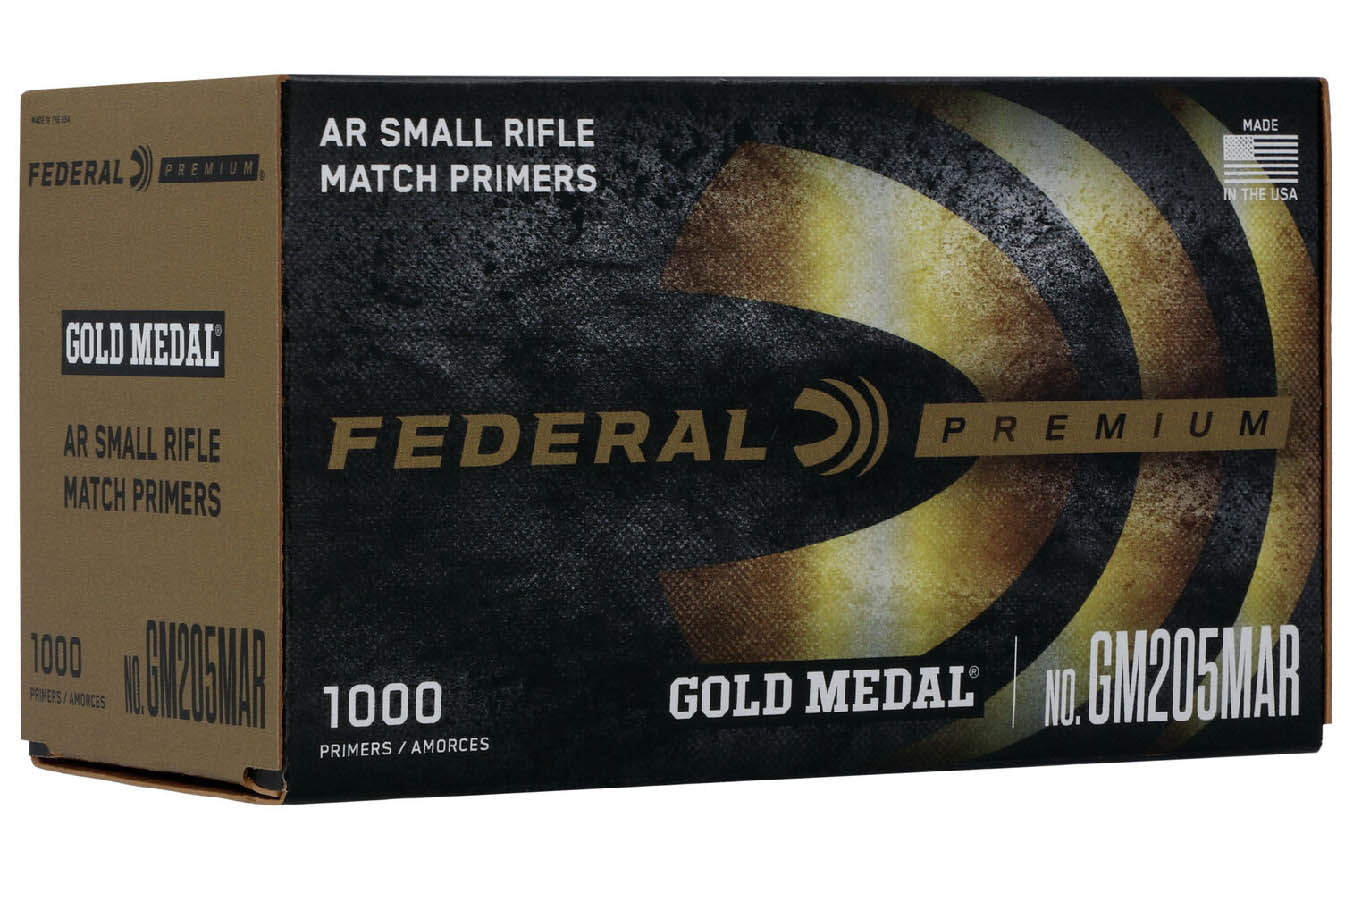 AR SMALL RIFLE MATCH PRIMERS (GOLD MEDAL) 1000/COUNT